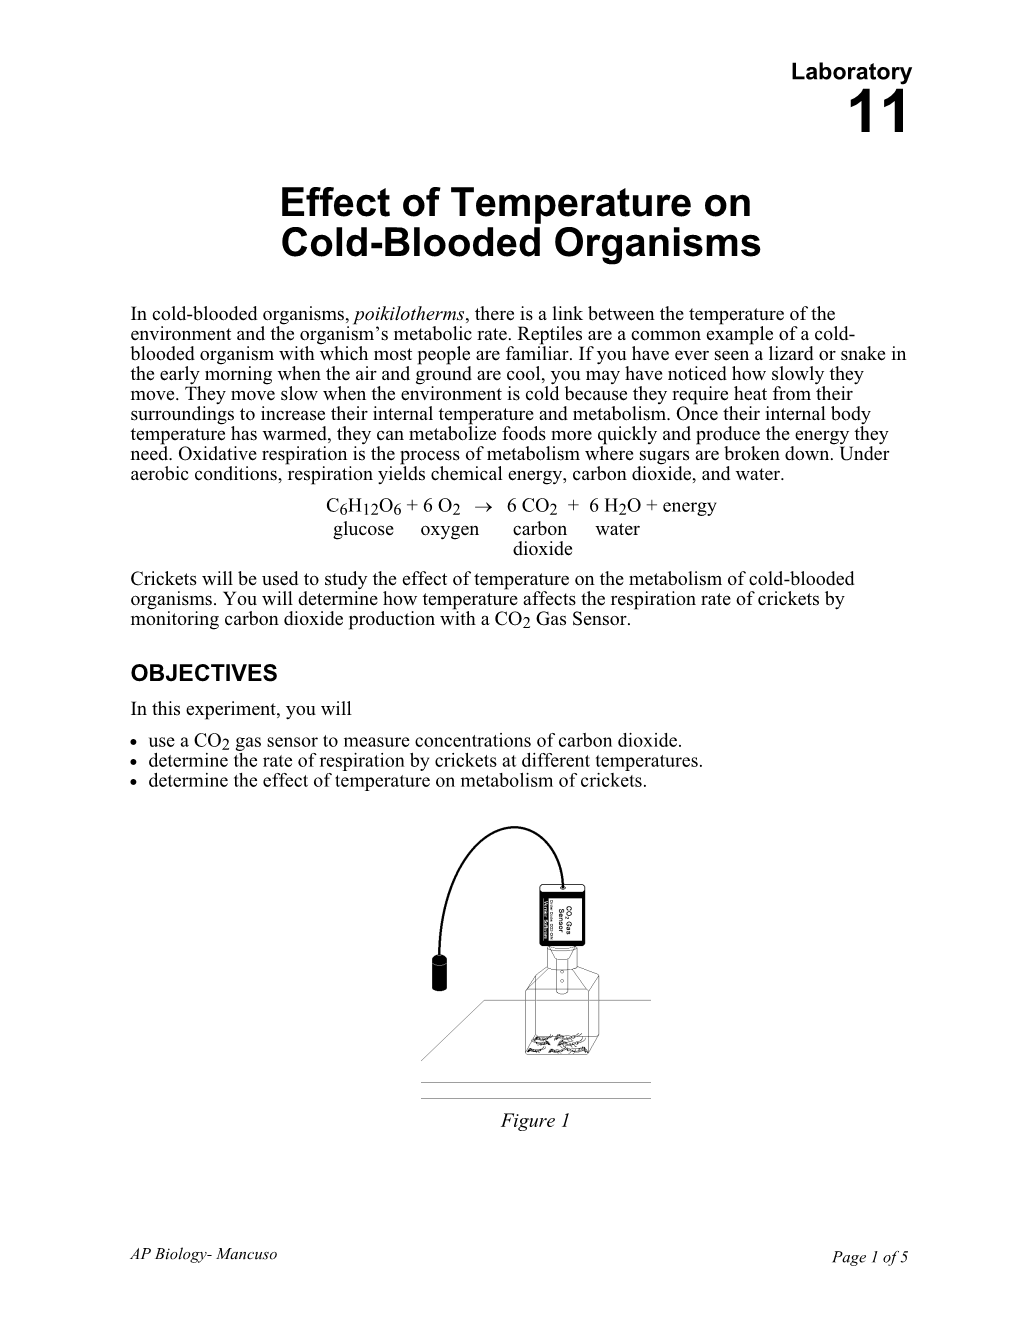 Effect of Temperature On